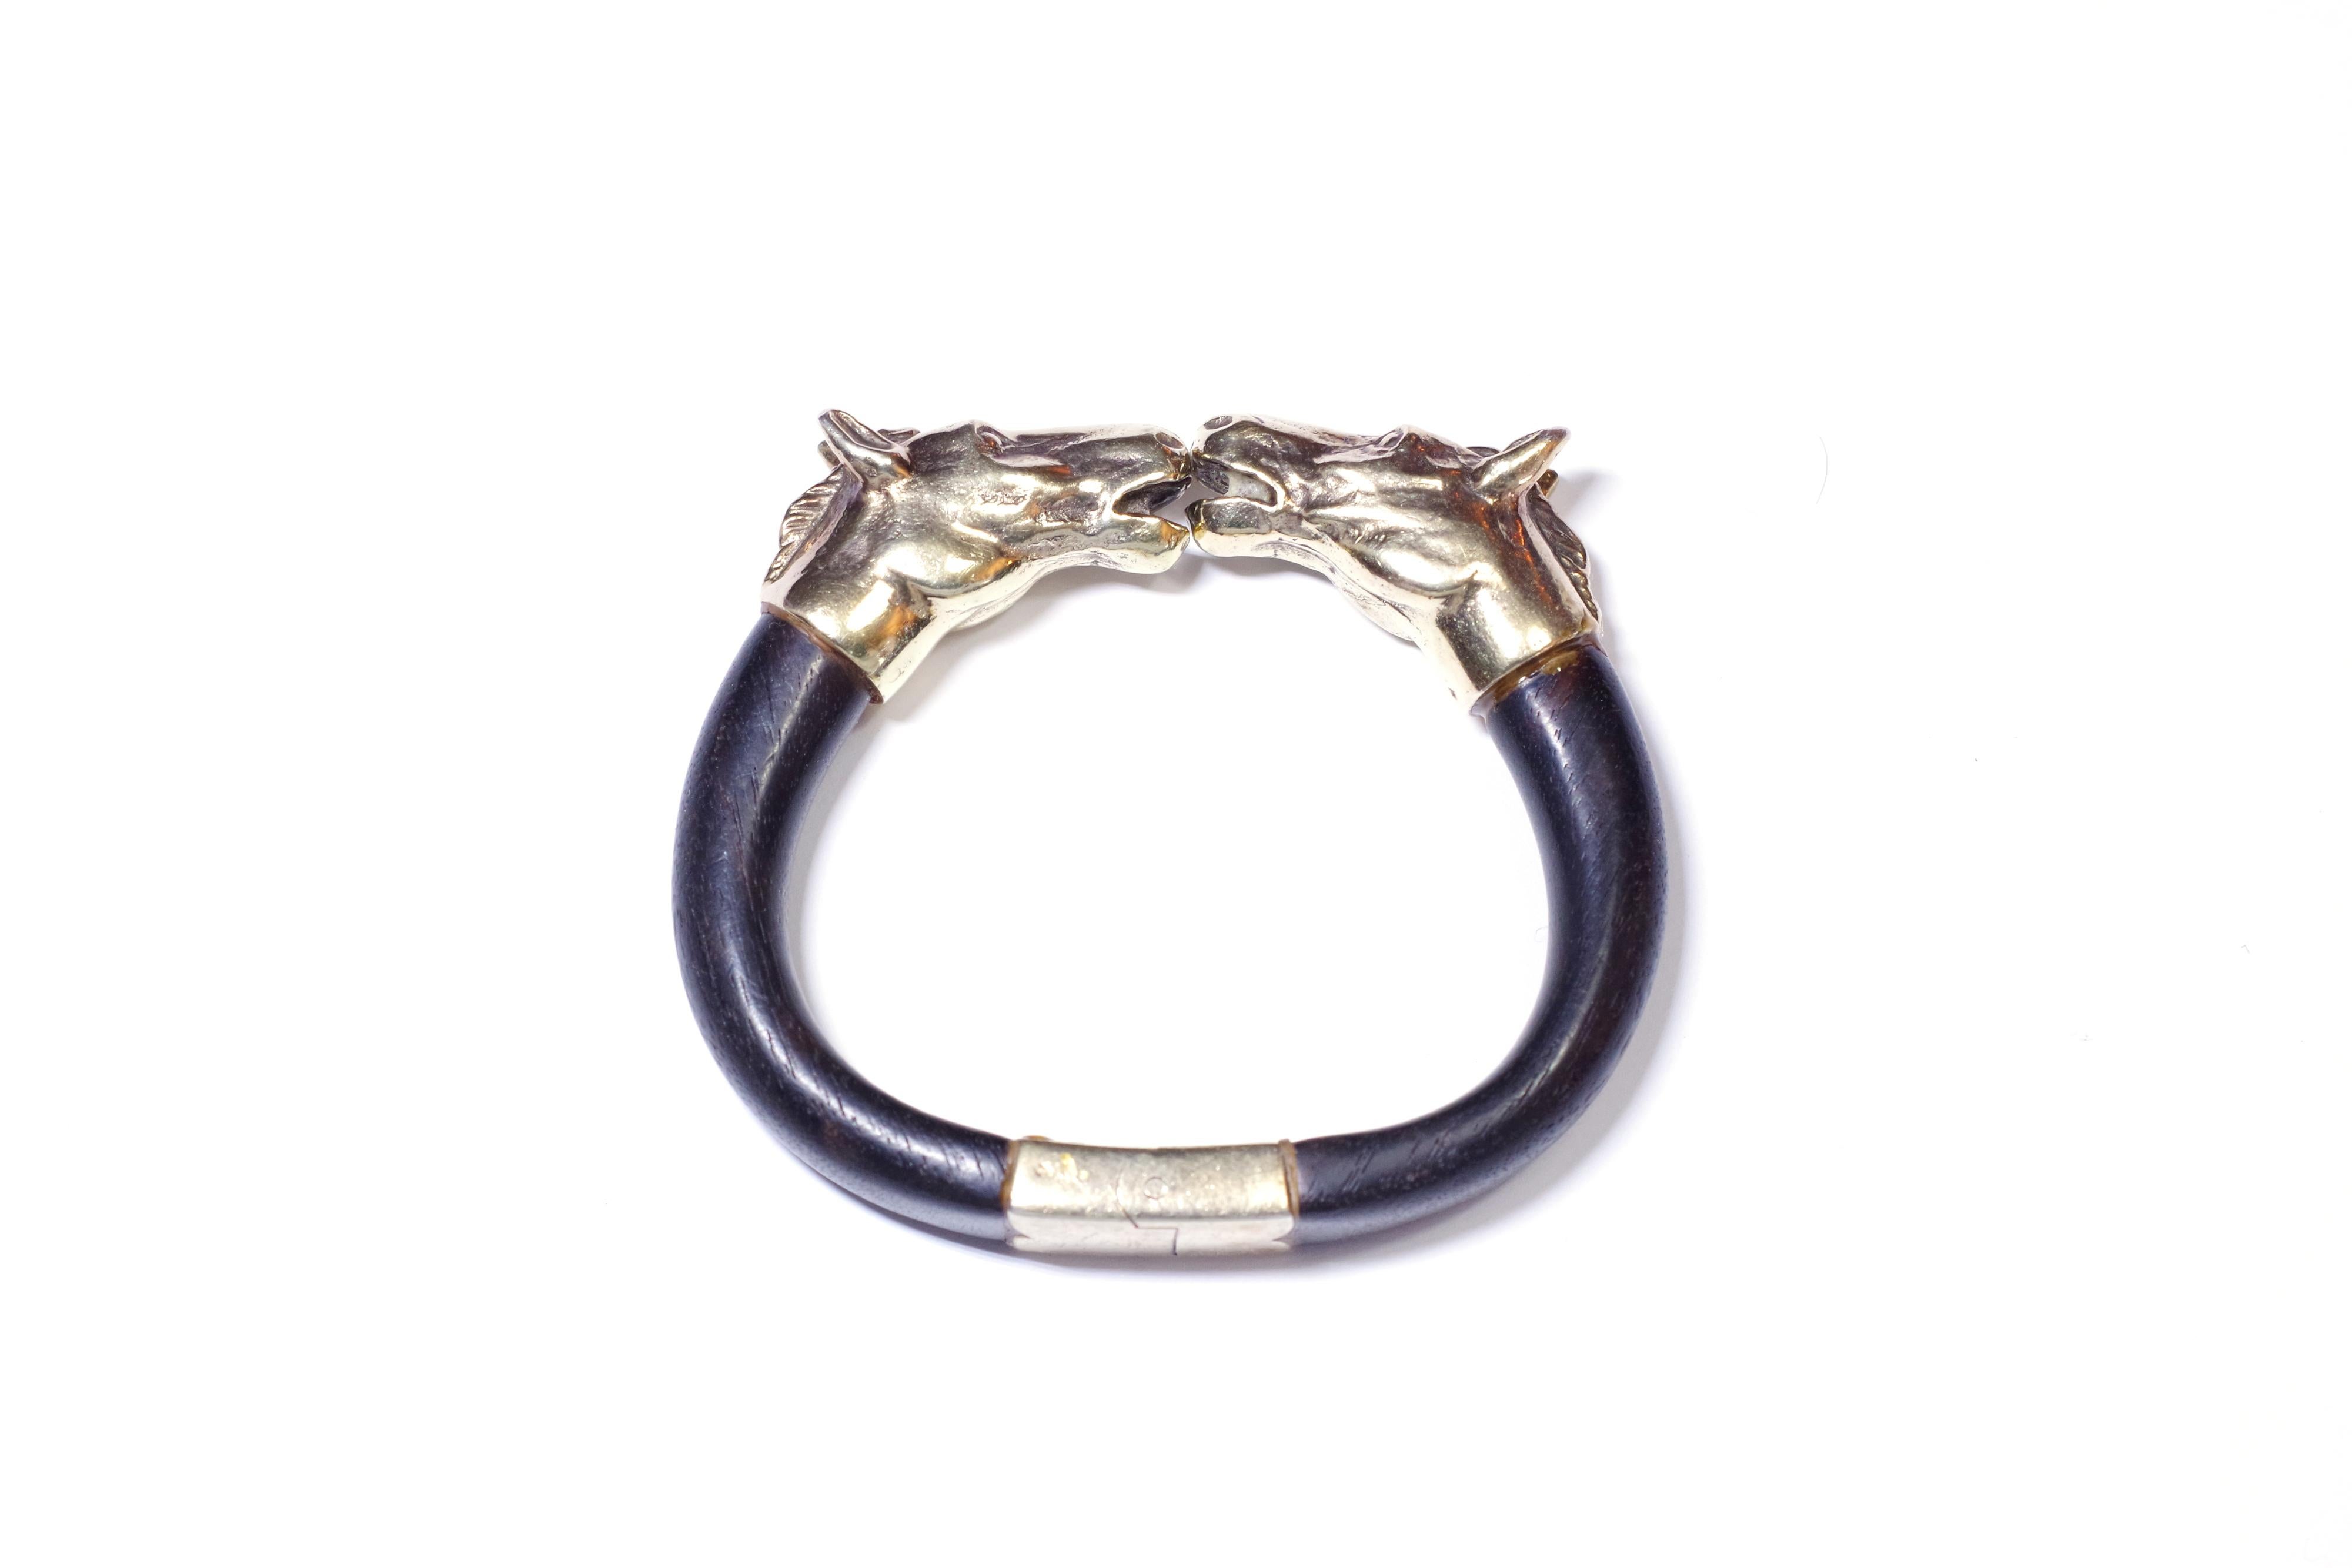 Horse heads bracelet with articulated ebony and silver gilt. The ends of the bracelet are two horse heads in solid silver and delicately chased. The two sculptures are similar but not identical. The nostrils, the open mouth, the muzzle and the mane